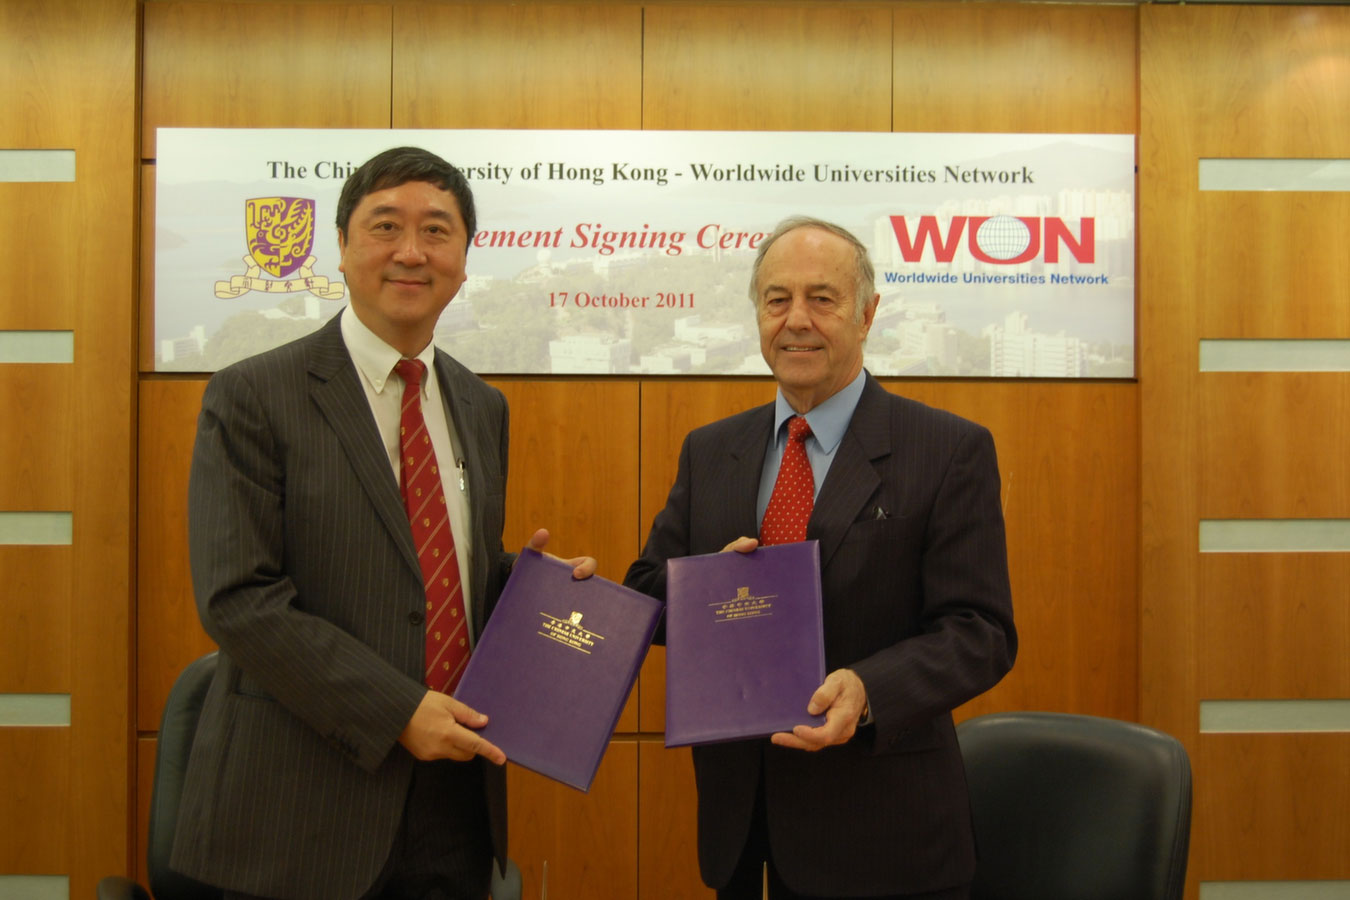 CUHK to join the Worldwide Universities Network (2011)